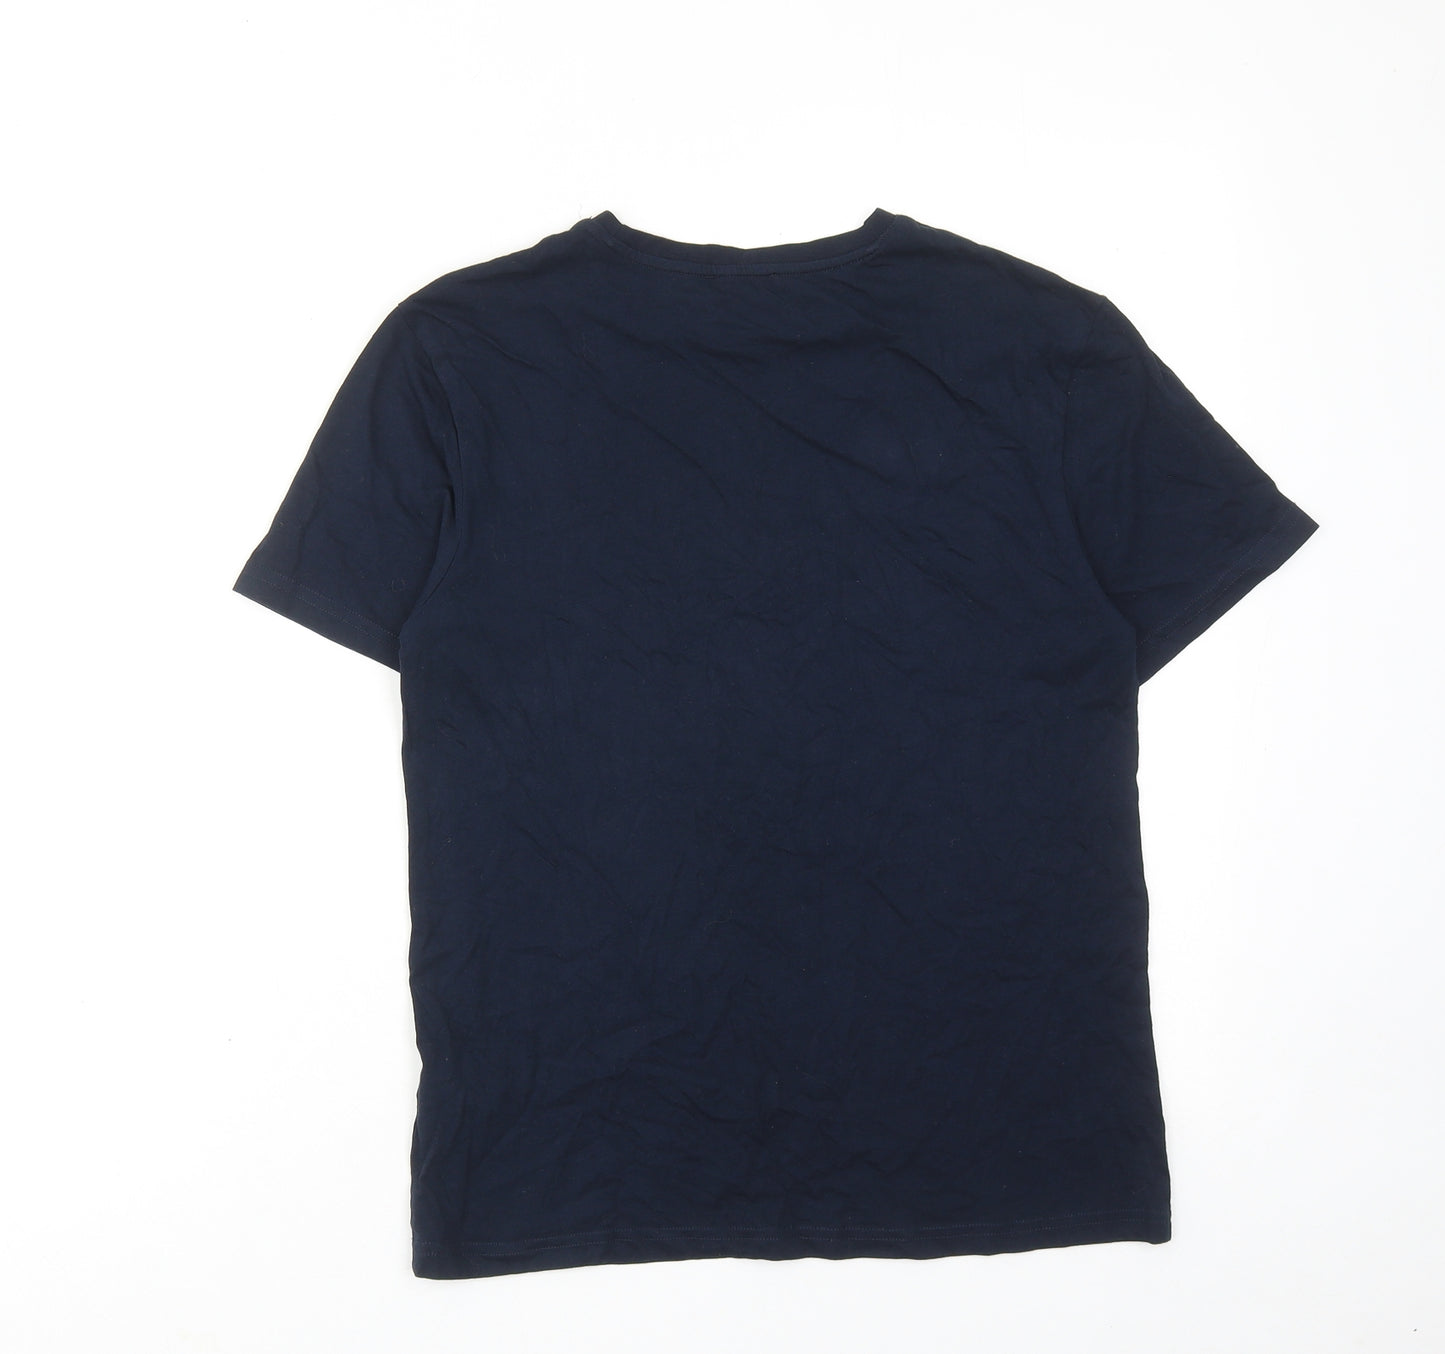 New Look Girls Blue Cotton Basic T-Shirt Size 10-11 Years Round Neck Pullover - 10402